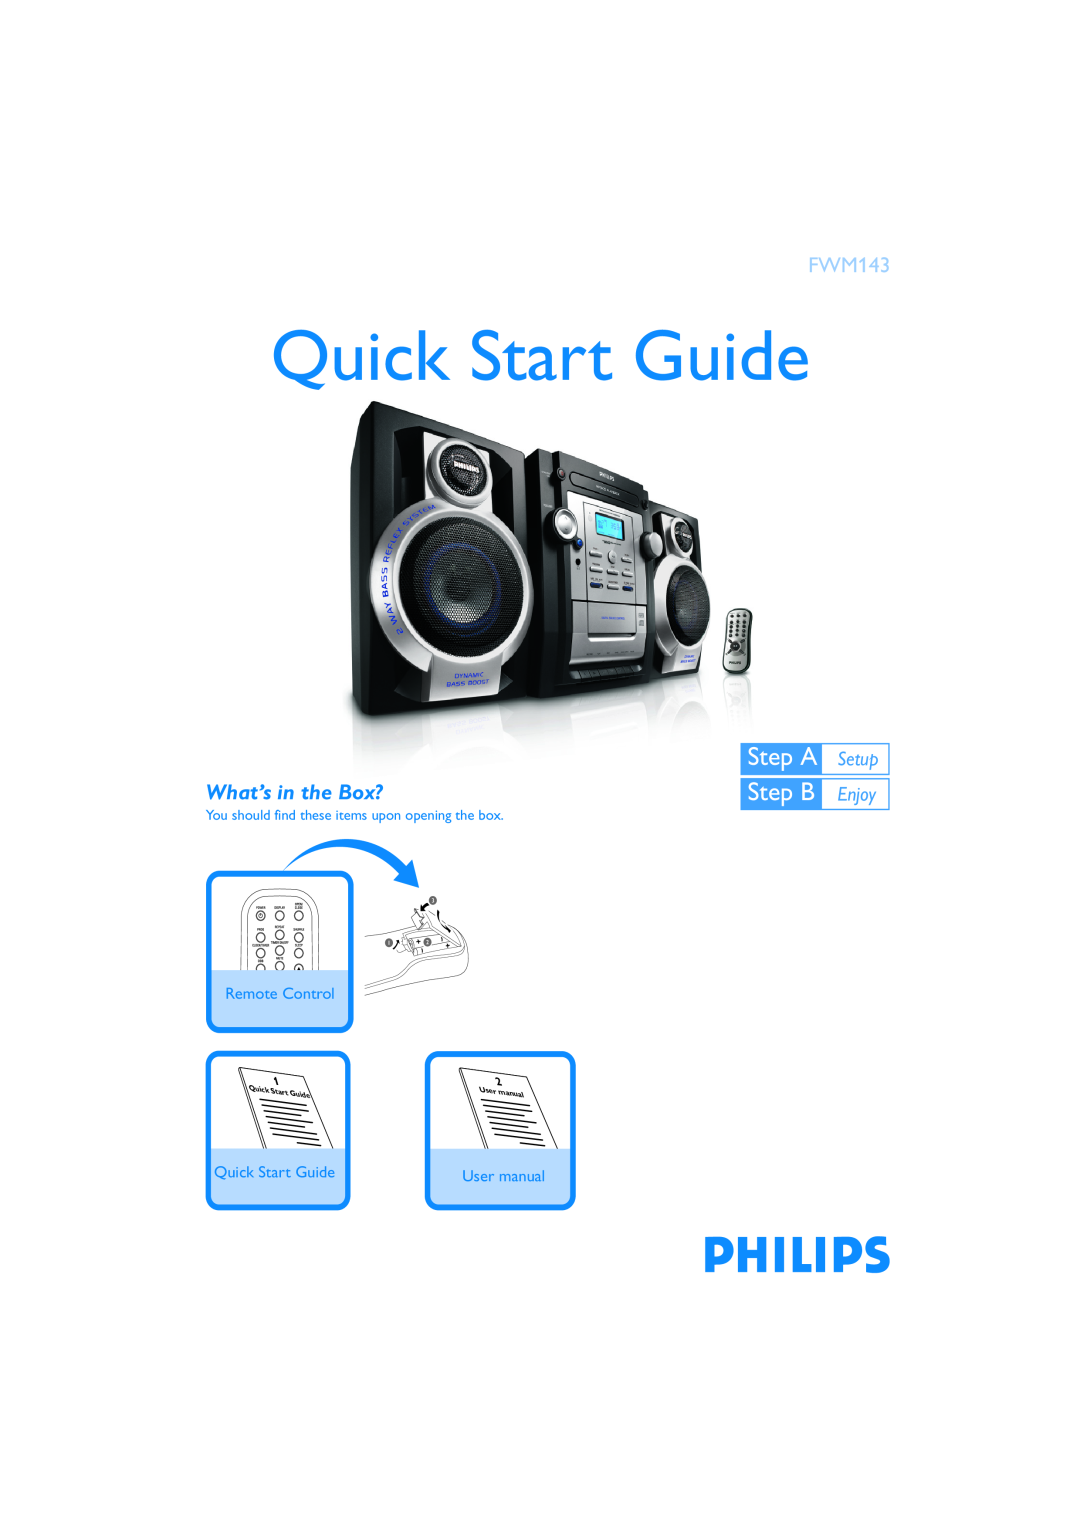 Philips FWM143s quick start Quick Start Guide, Step ASetup Step BEnjoy, What’s in the Box?, Remote Control, StartGuide 